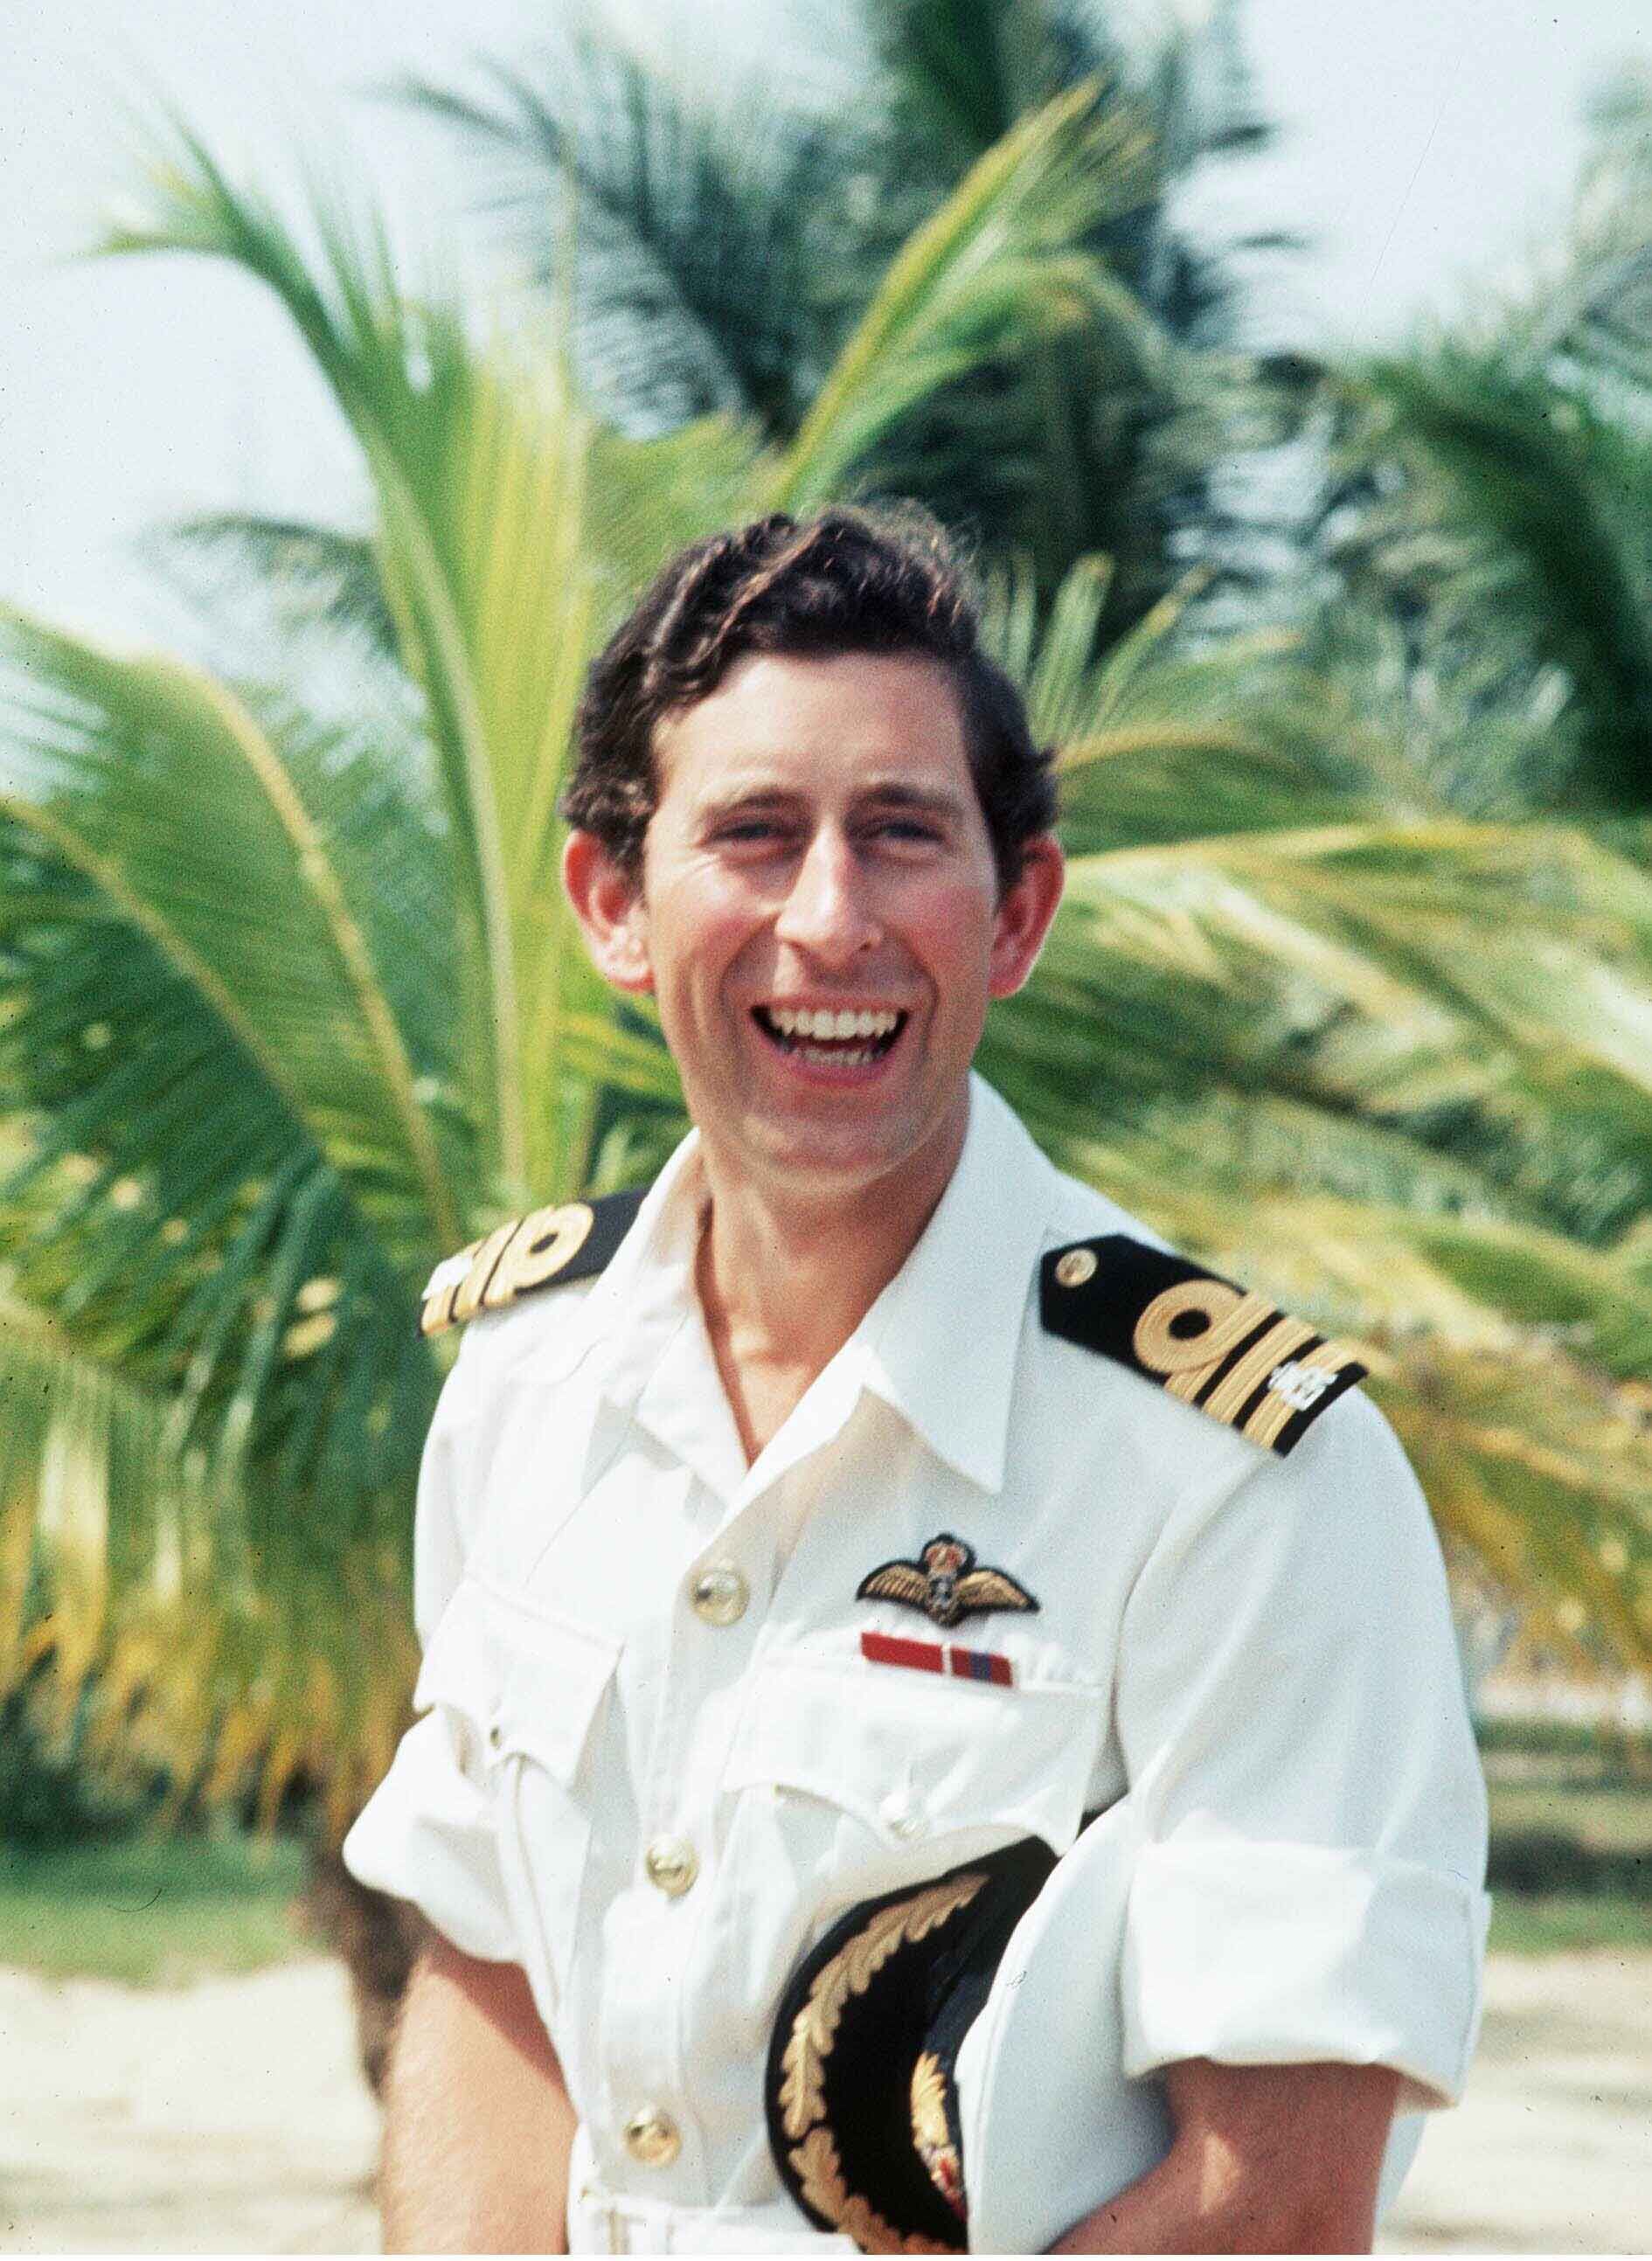 Prince Charles Pictures Photos Of Prince Charles Throughout History